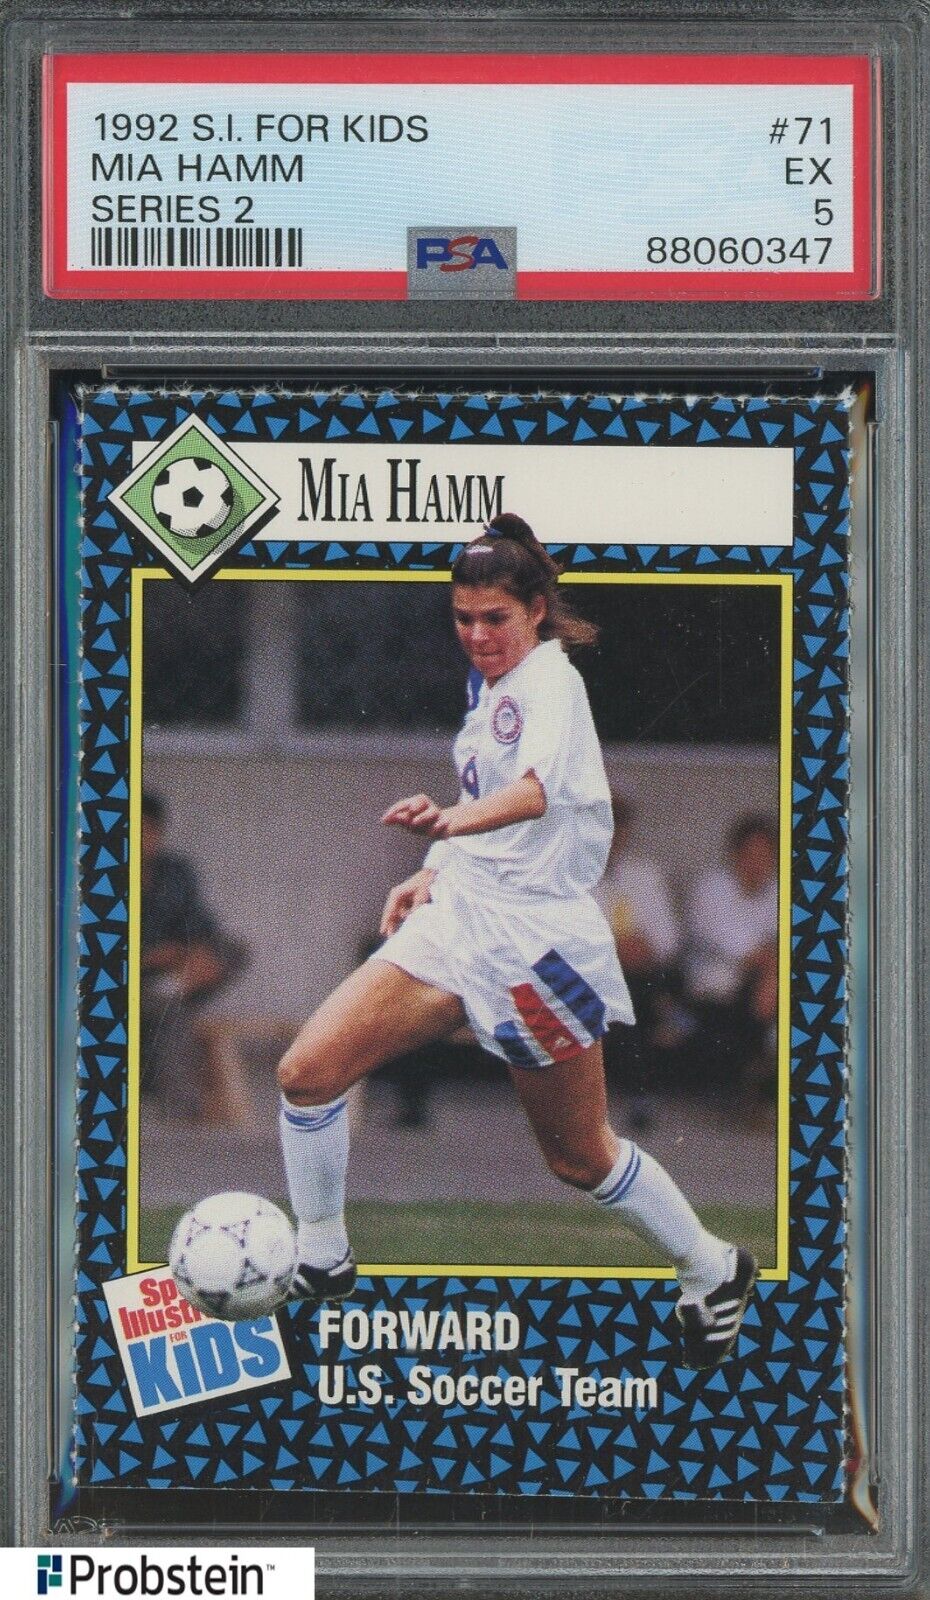 1992 Sports Illustrated SI For Kids SIFK Soccer Series 2 #71 Mia Hamm RC PSA 5